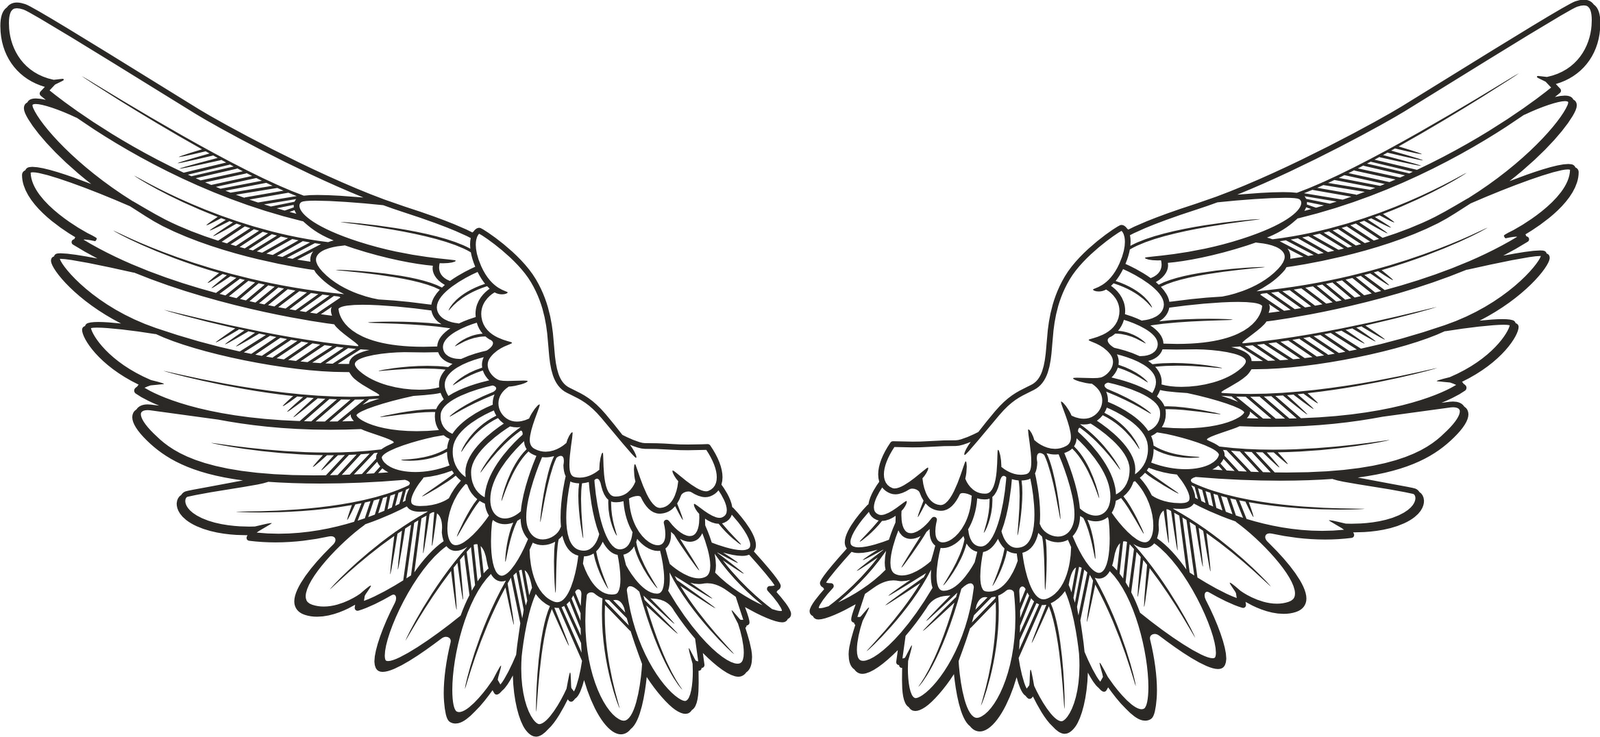 Wings cliparts